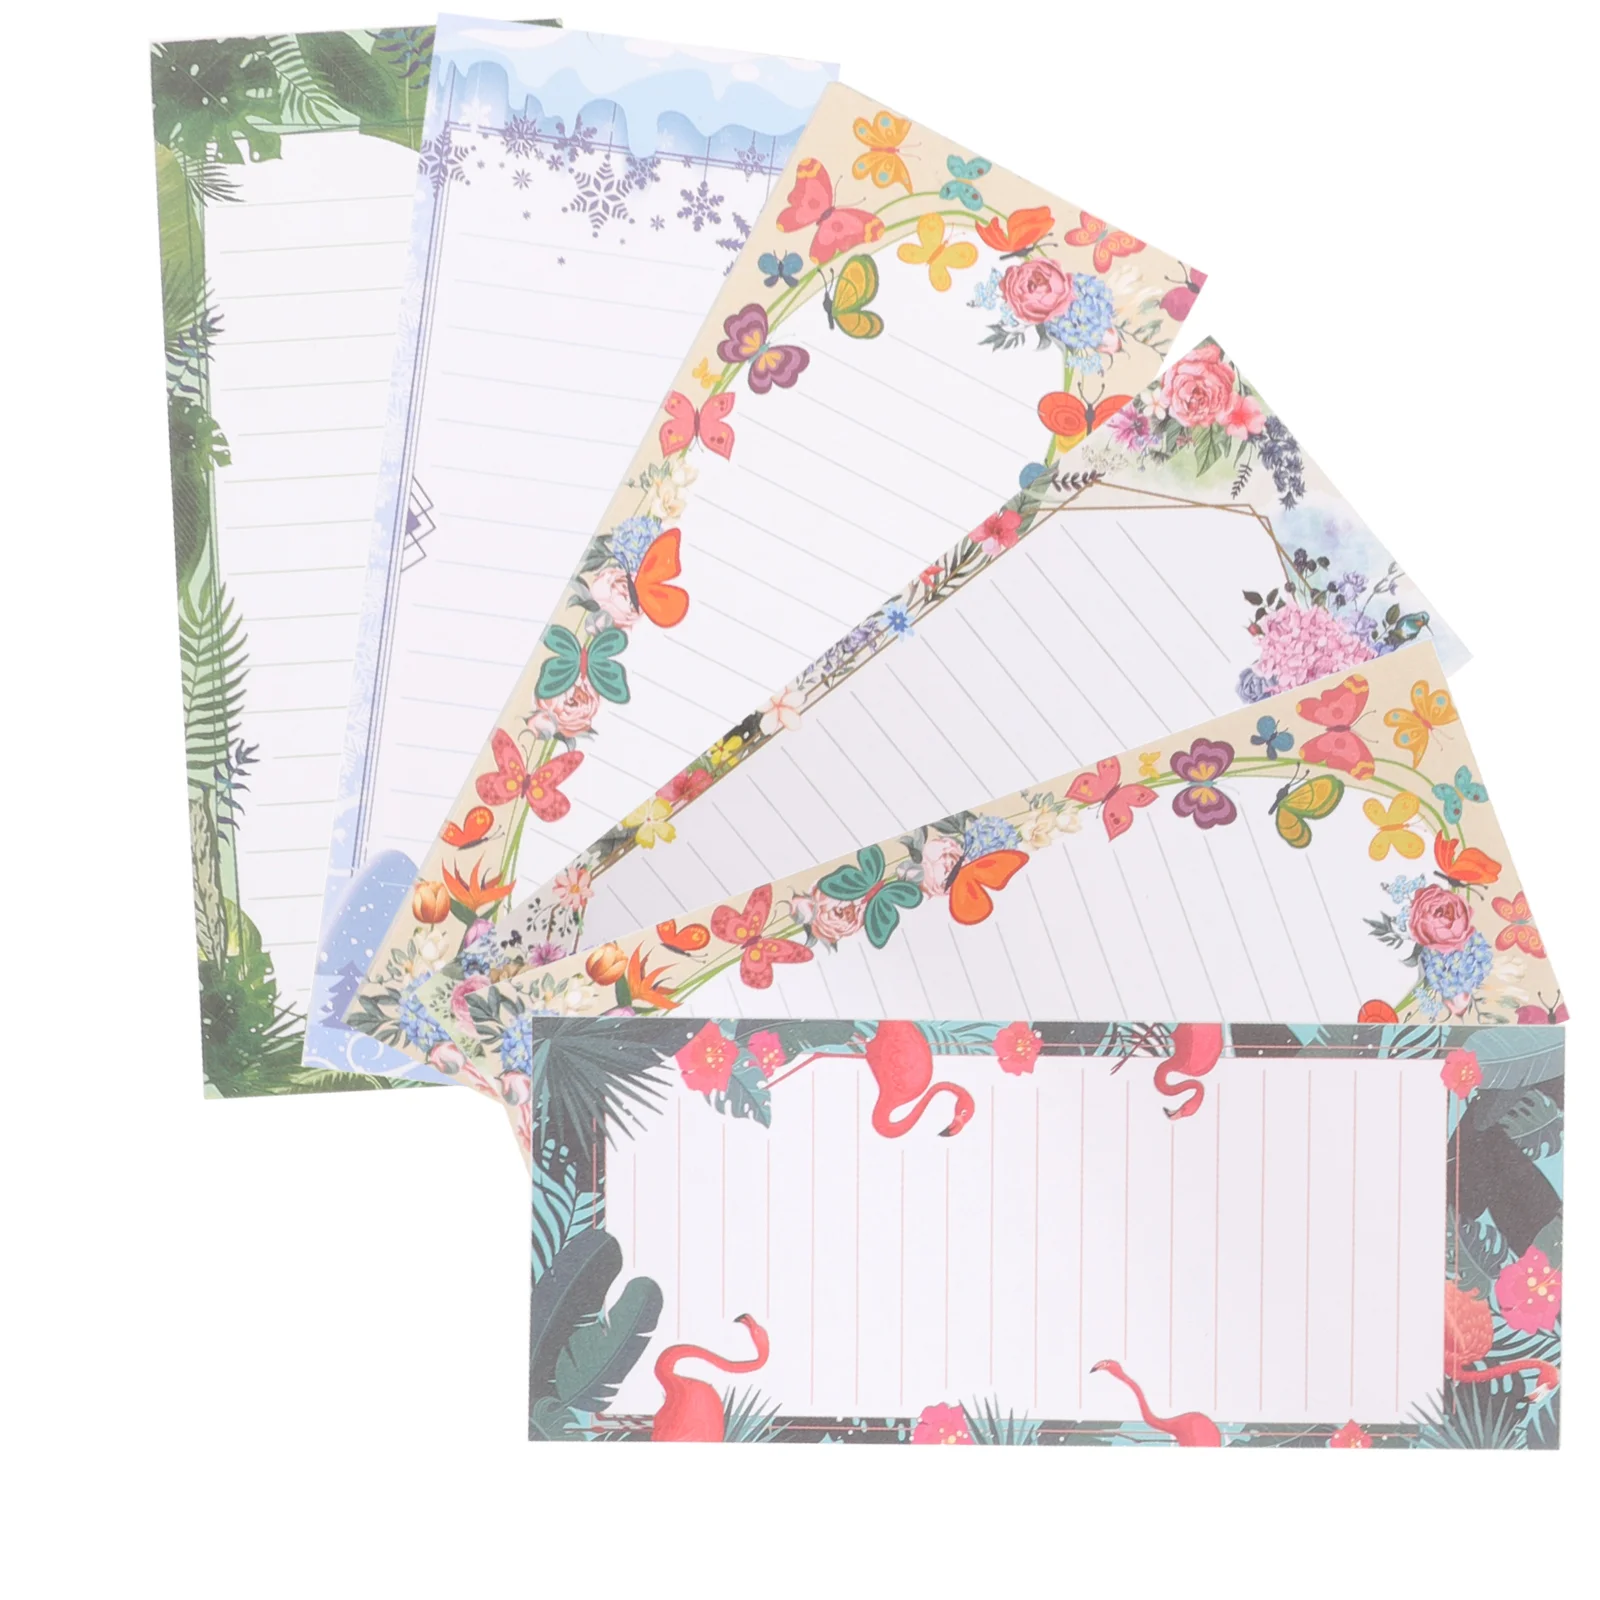 6pcs Magnetic Notepads Grocery List Shopping List Notepads with Magnet Fridge Memo Notepads